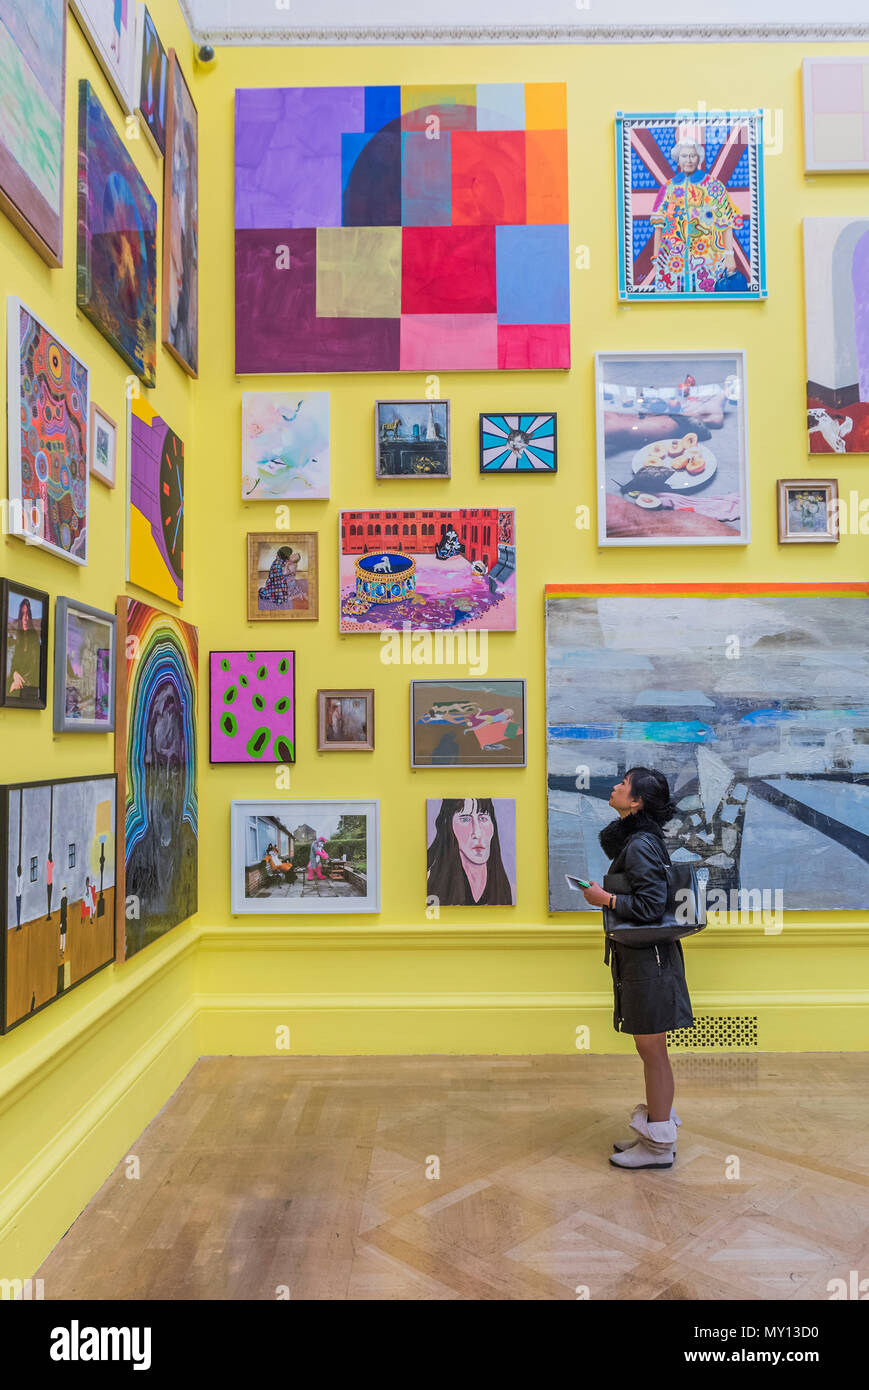 London, UK. 5th Jun, 2018. Royal Academy celebrates its 250th Summer Exhibition, and to mark this momentous occasion, the exhibition is co-ordinated by Grayson Perry RA. Credit: Guy Bell/Alamy Live News Stock Photo